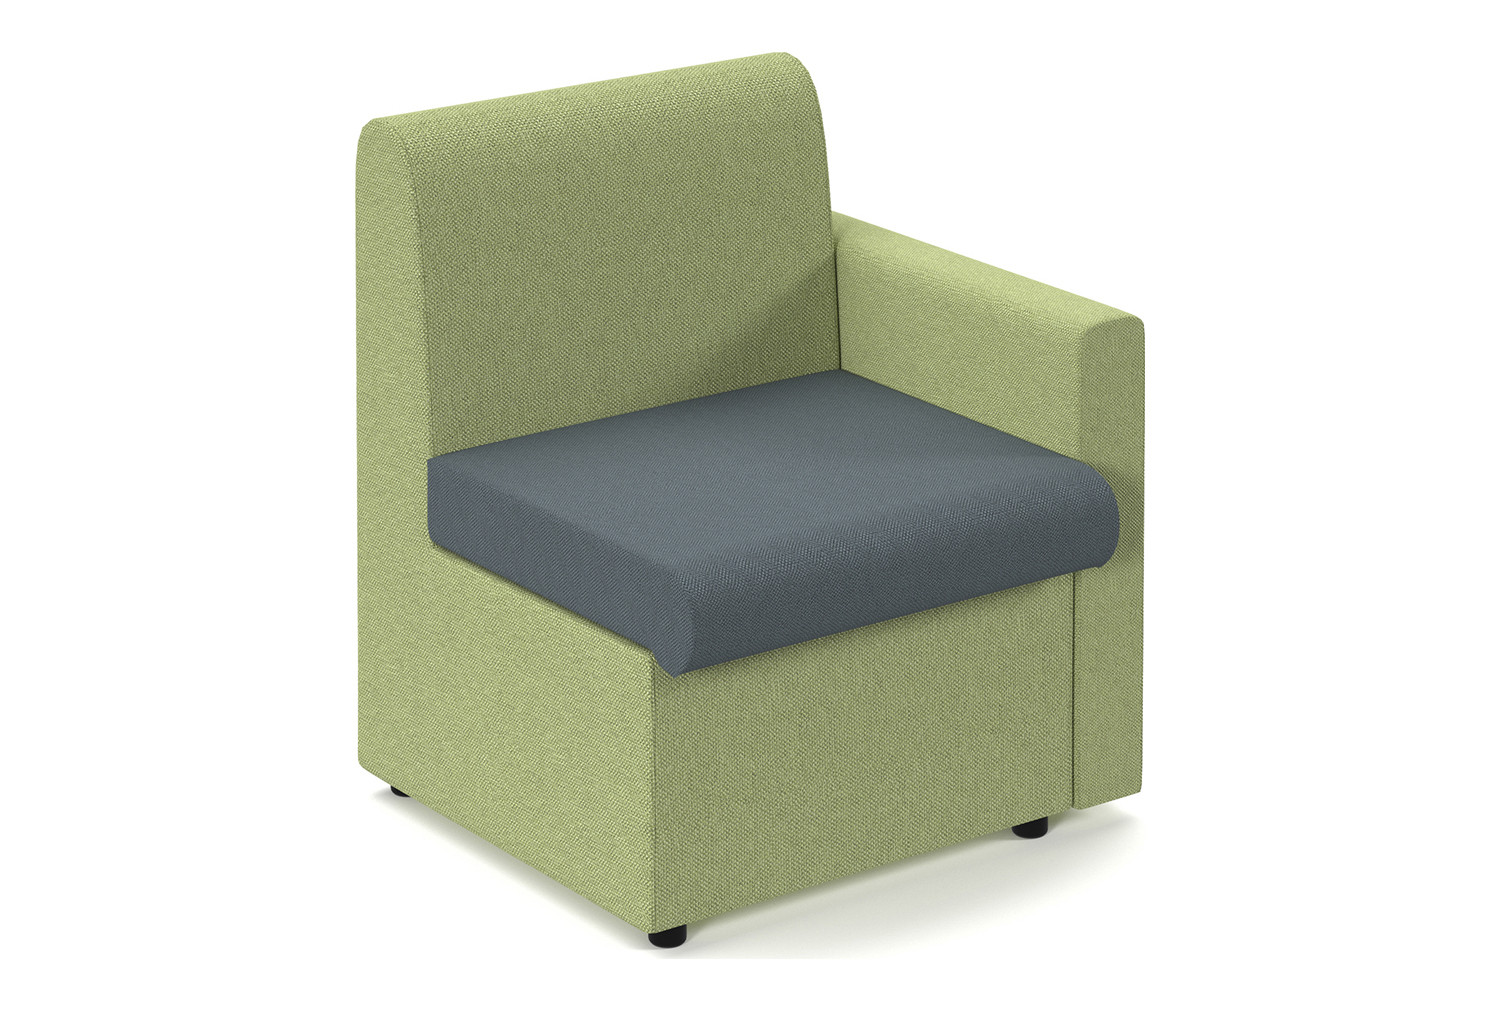 Portland 2 Tone Modular Soft Seating, Chair With Left Arm, Elapse Grey Seat/Endurance Green Back